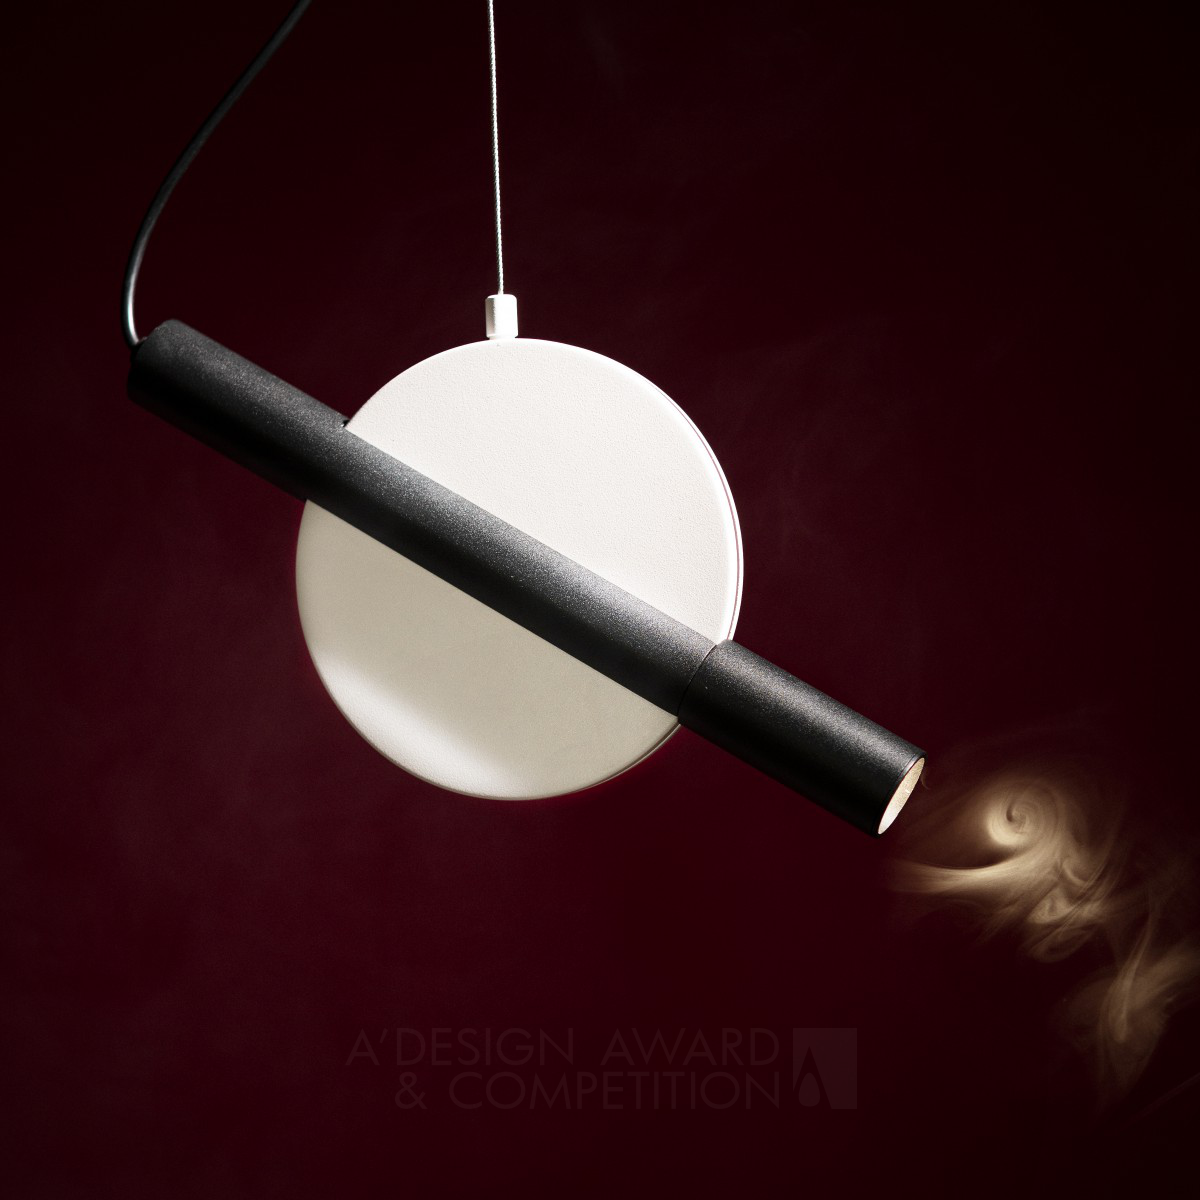 Insight Pendant Lamp: A Blend of Form and Function